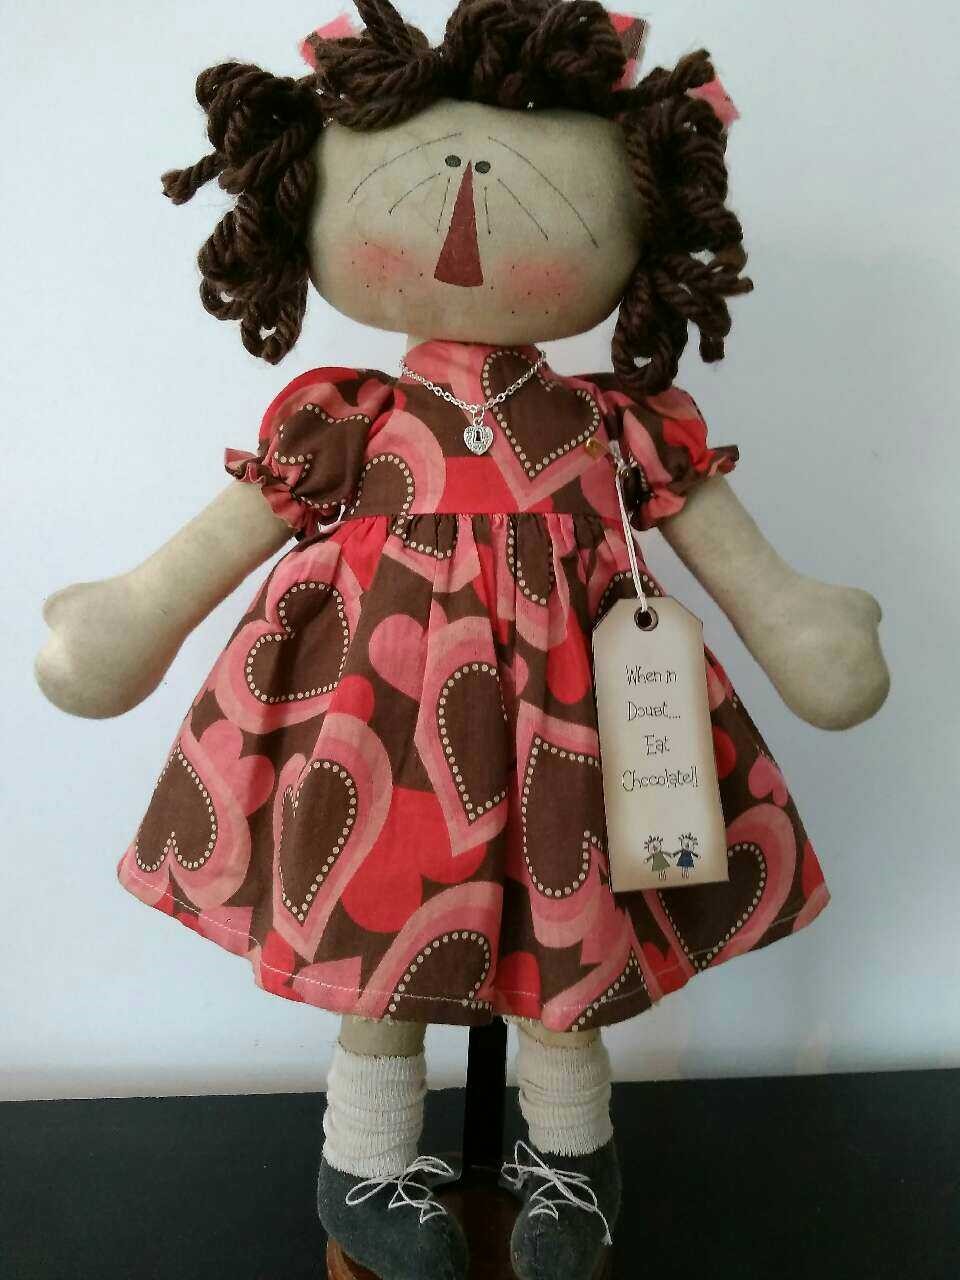 When in Doubt Eat Chocolate-handmade, hand crafted, primitive, country, rag doll, rag, doll, wholesale, retail, gift, present, friend gift, birthday gift, original, design, original design, chocolate, Valentine gift